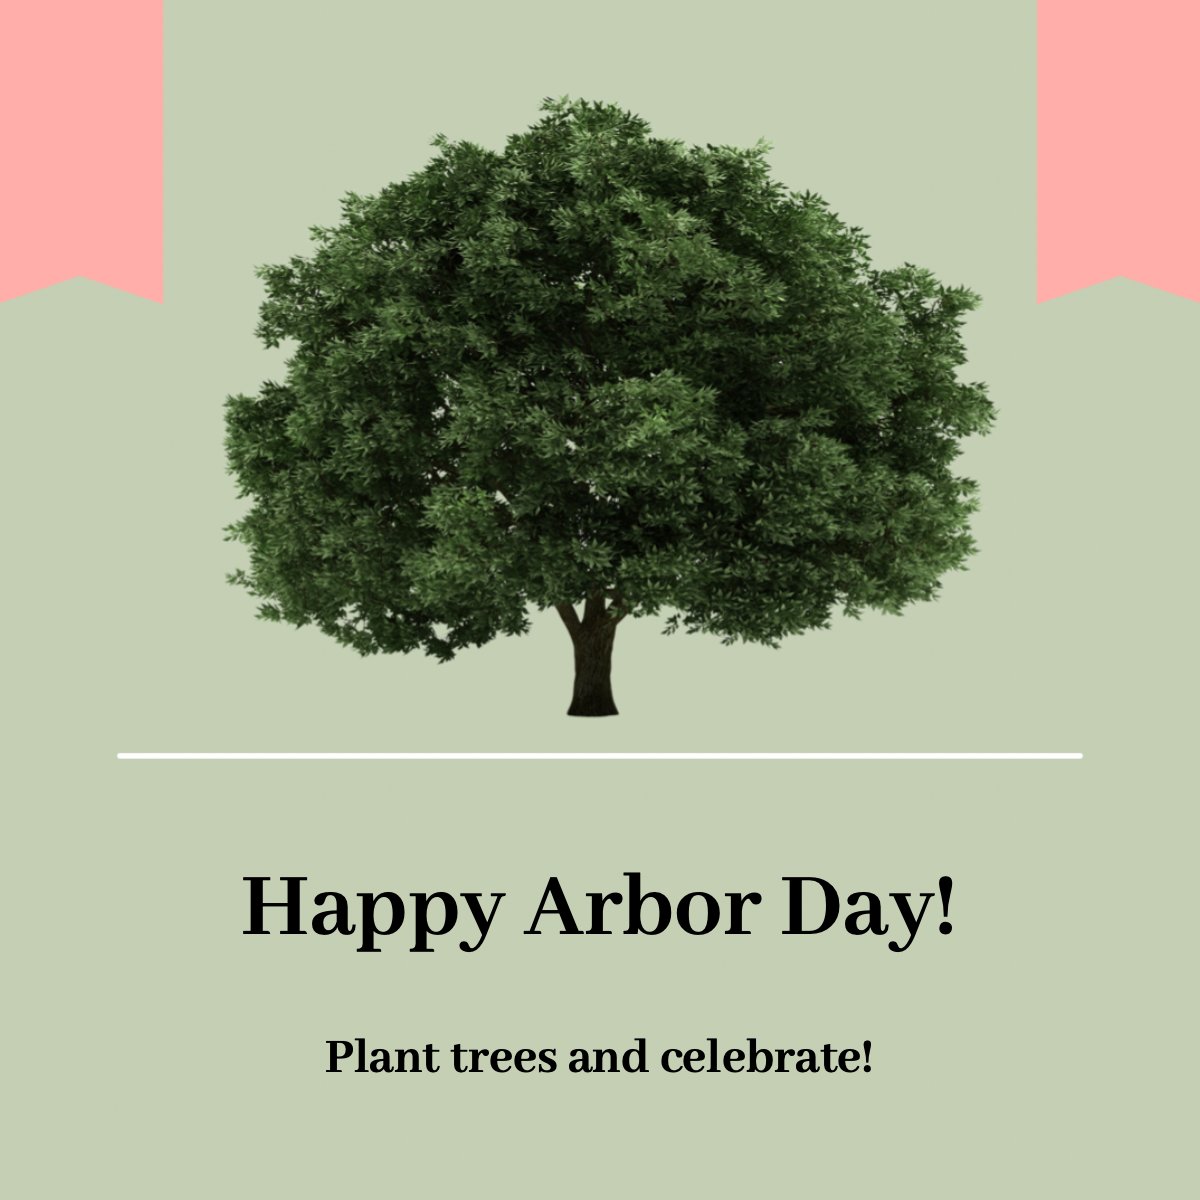 'There's nothing wrong with having a tree as a friend.' – Bob Ross

Happy Arbor Day 🌲!

#arborday #trees #dayforthetrees #blue #white #black #sunset
 #RealestateAppleton #Appletonwisconsin #AppletonWisconsinRealEstate #CharlesRobbinsRealtor